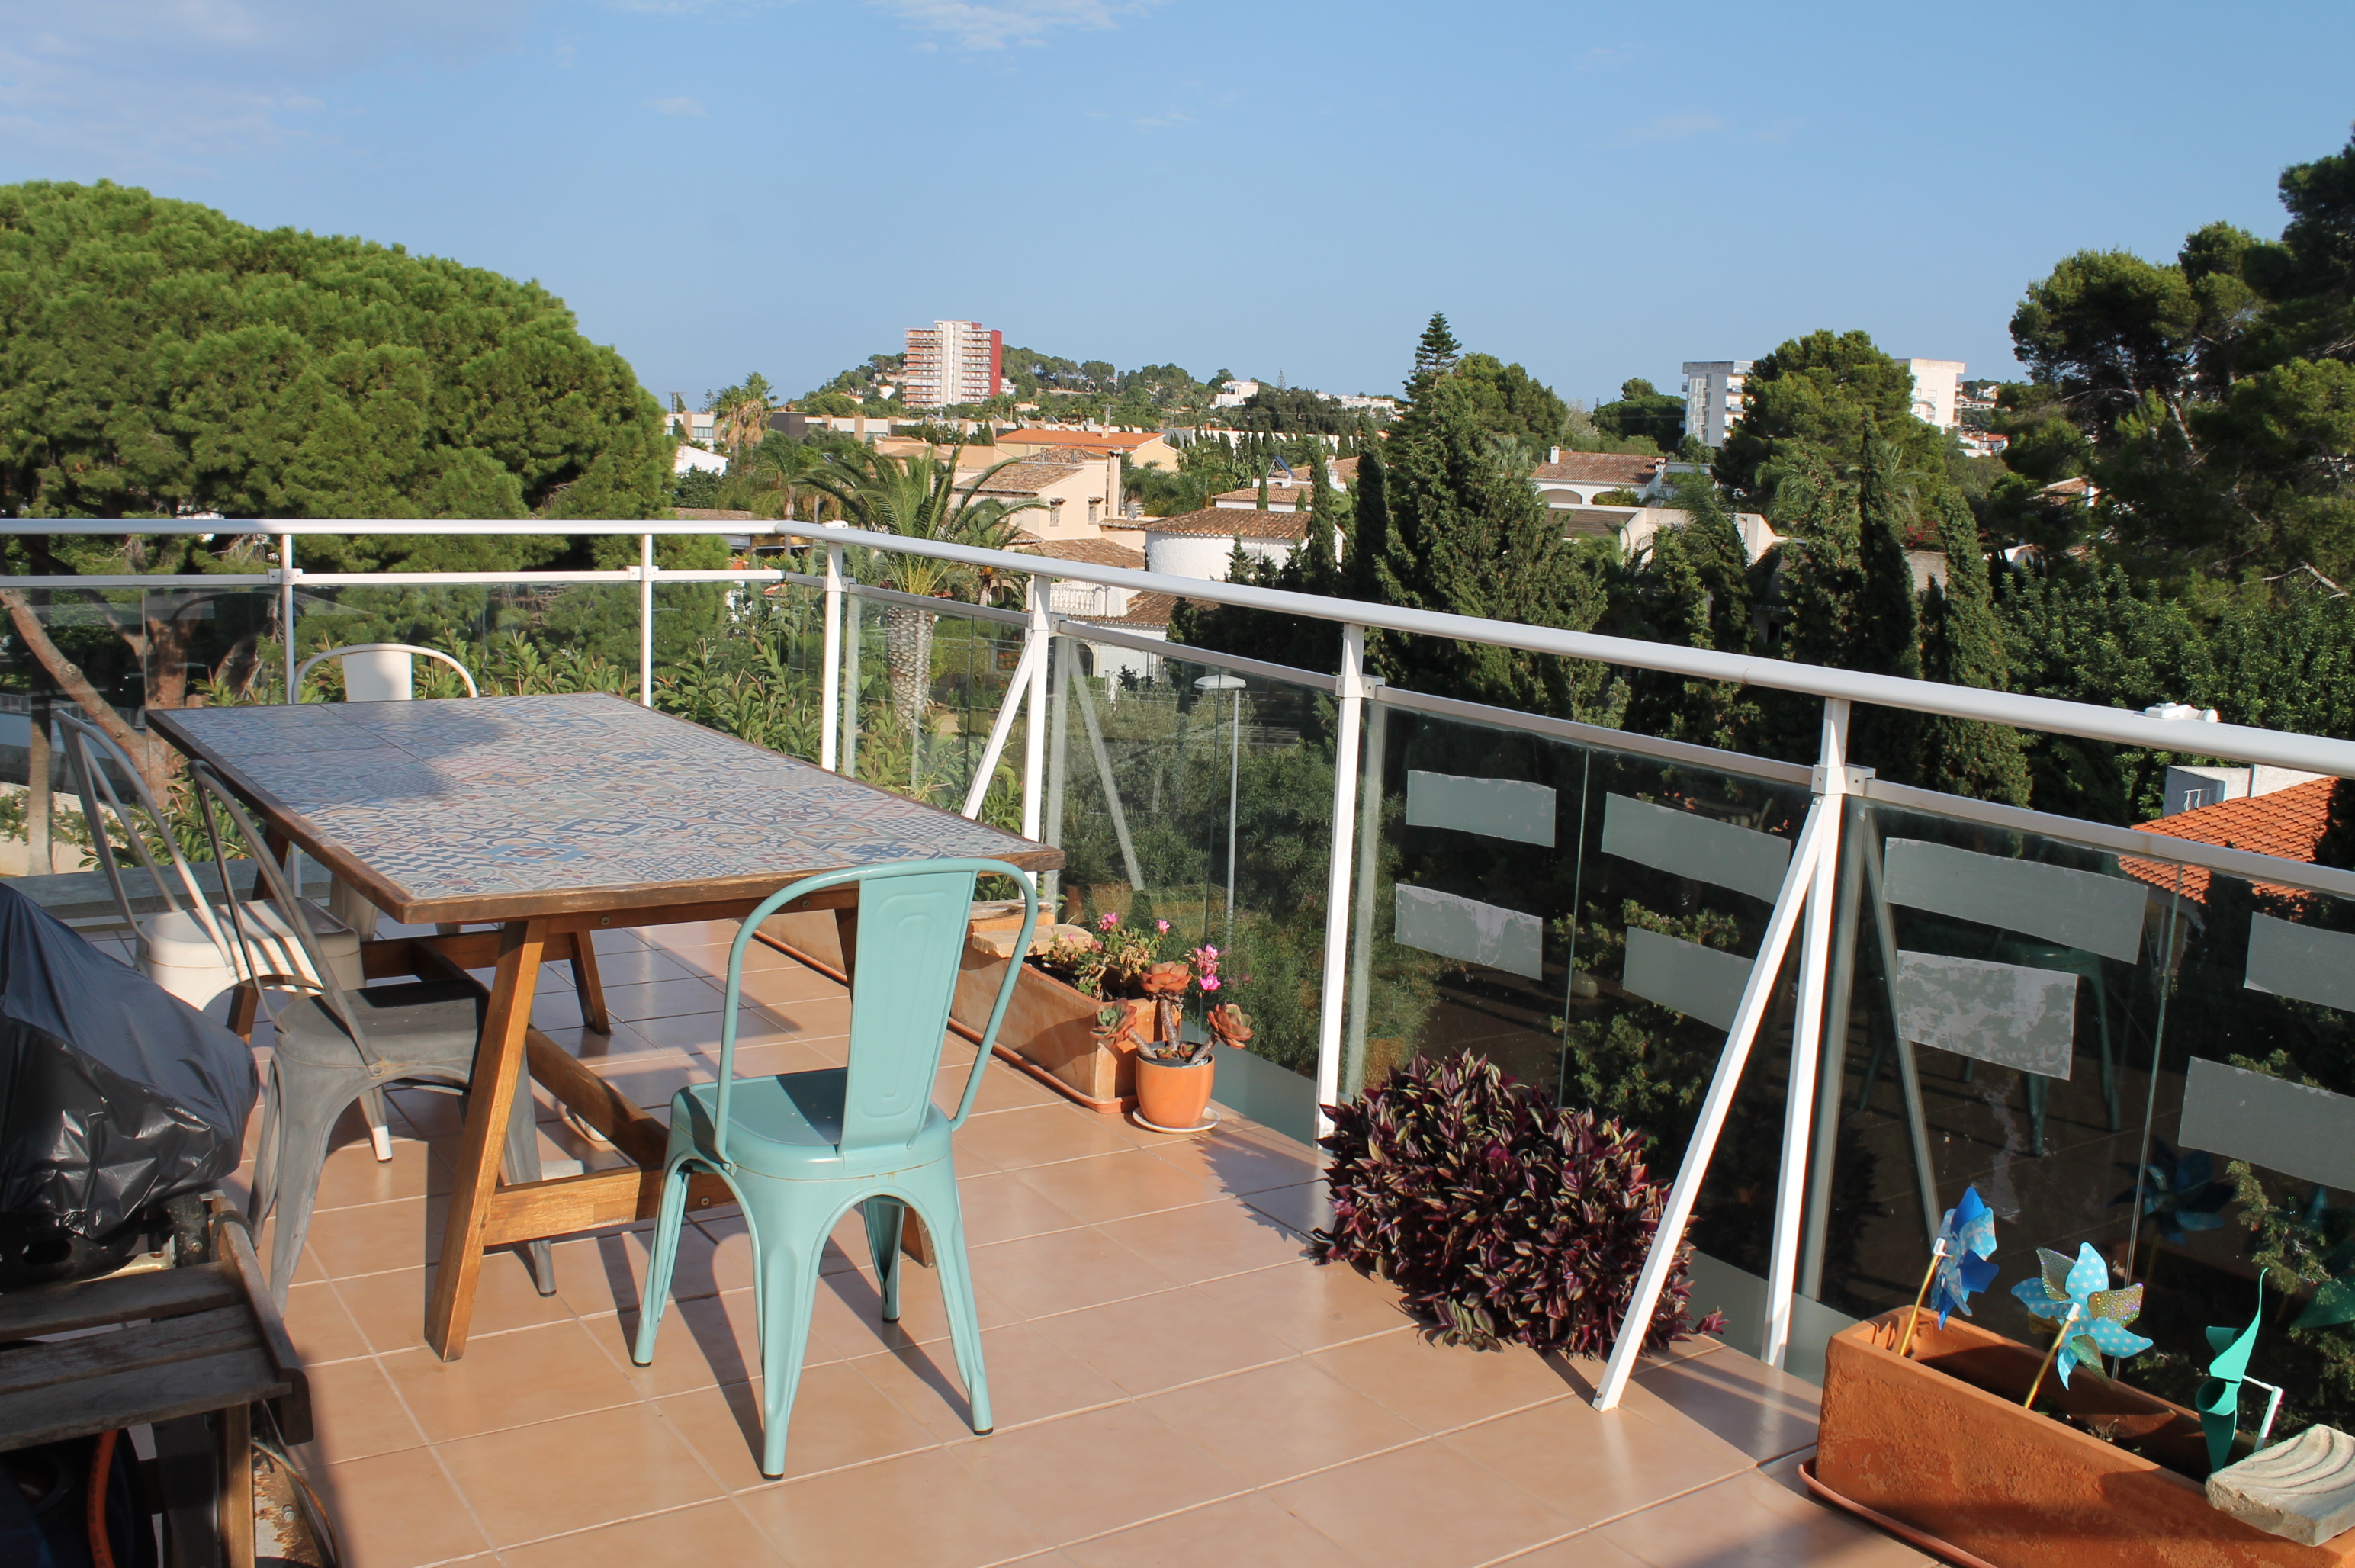 3 bedroom duplex penthouse for sale in Dénia a step away from the town with panoramic views of Montgo